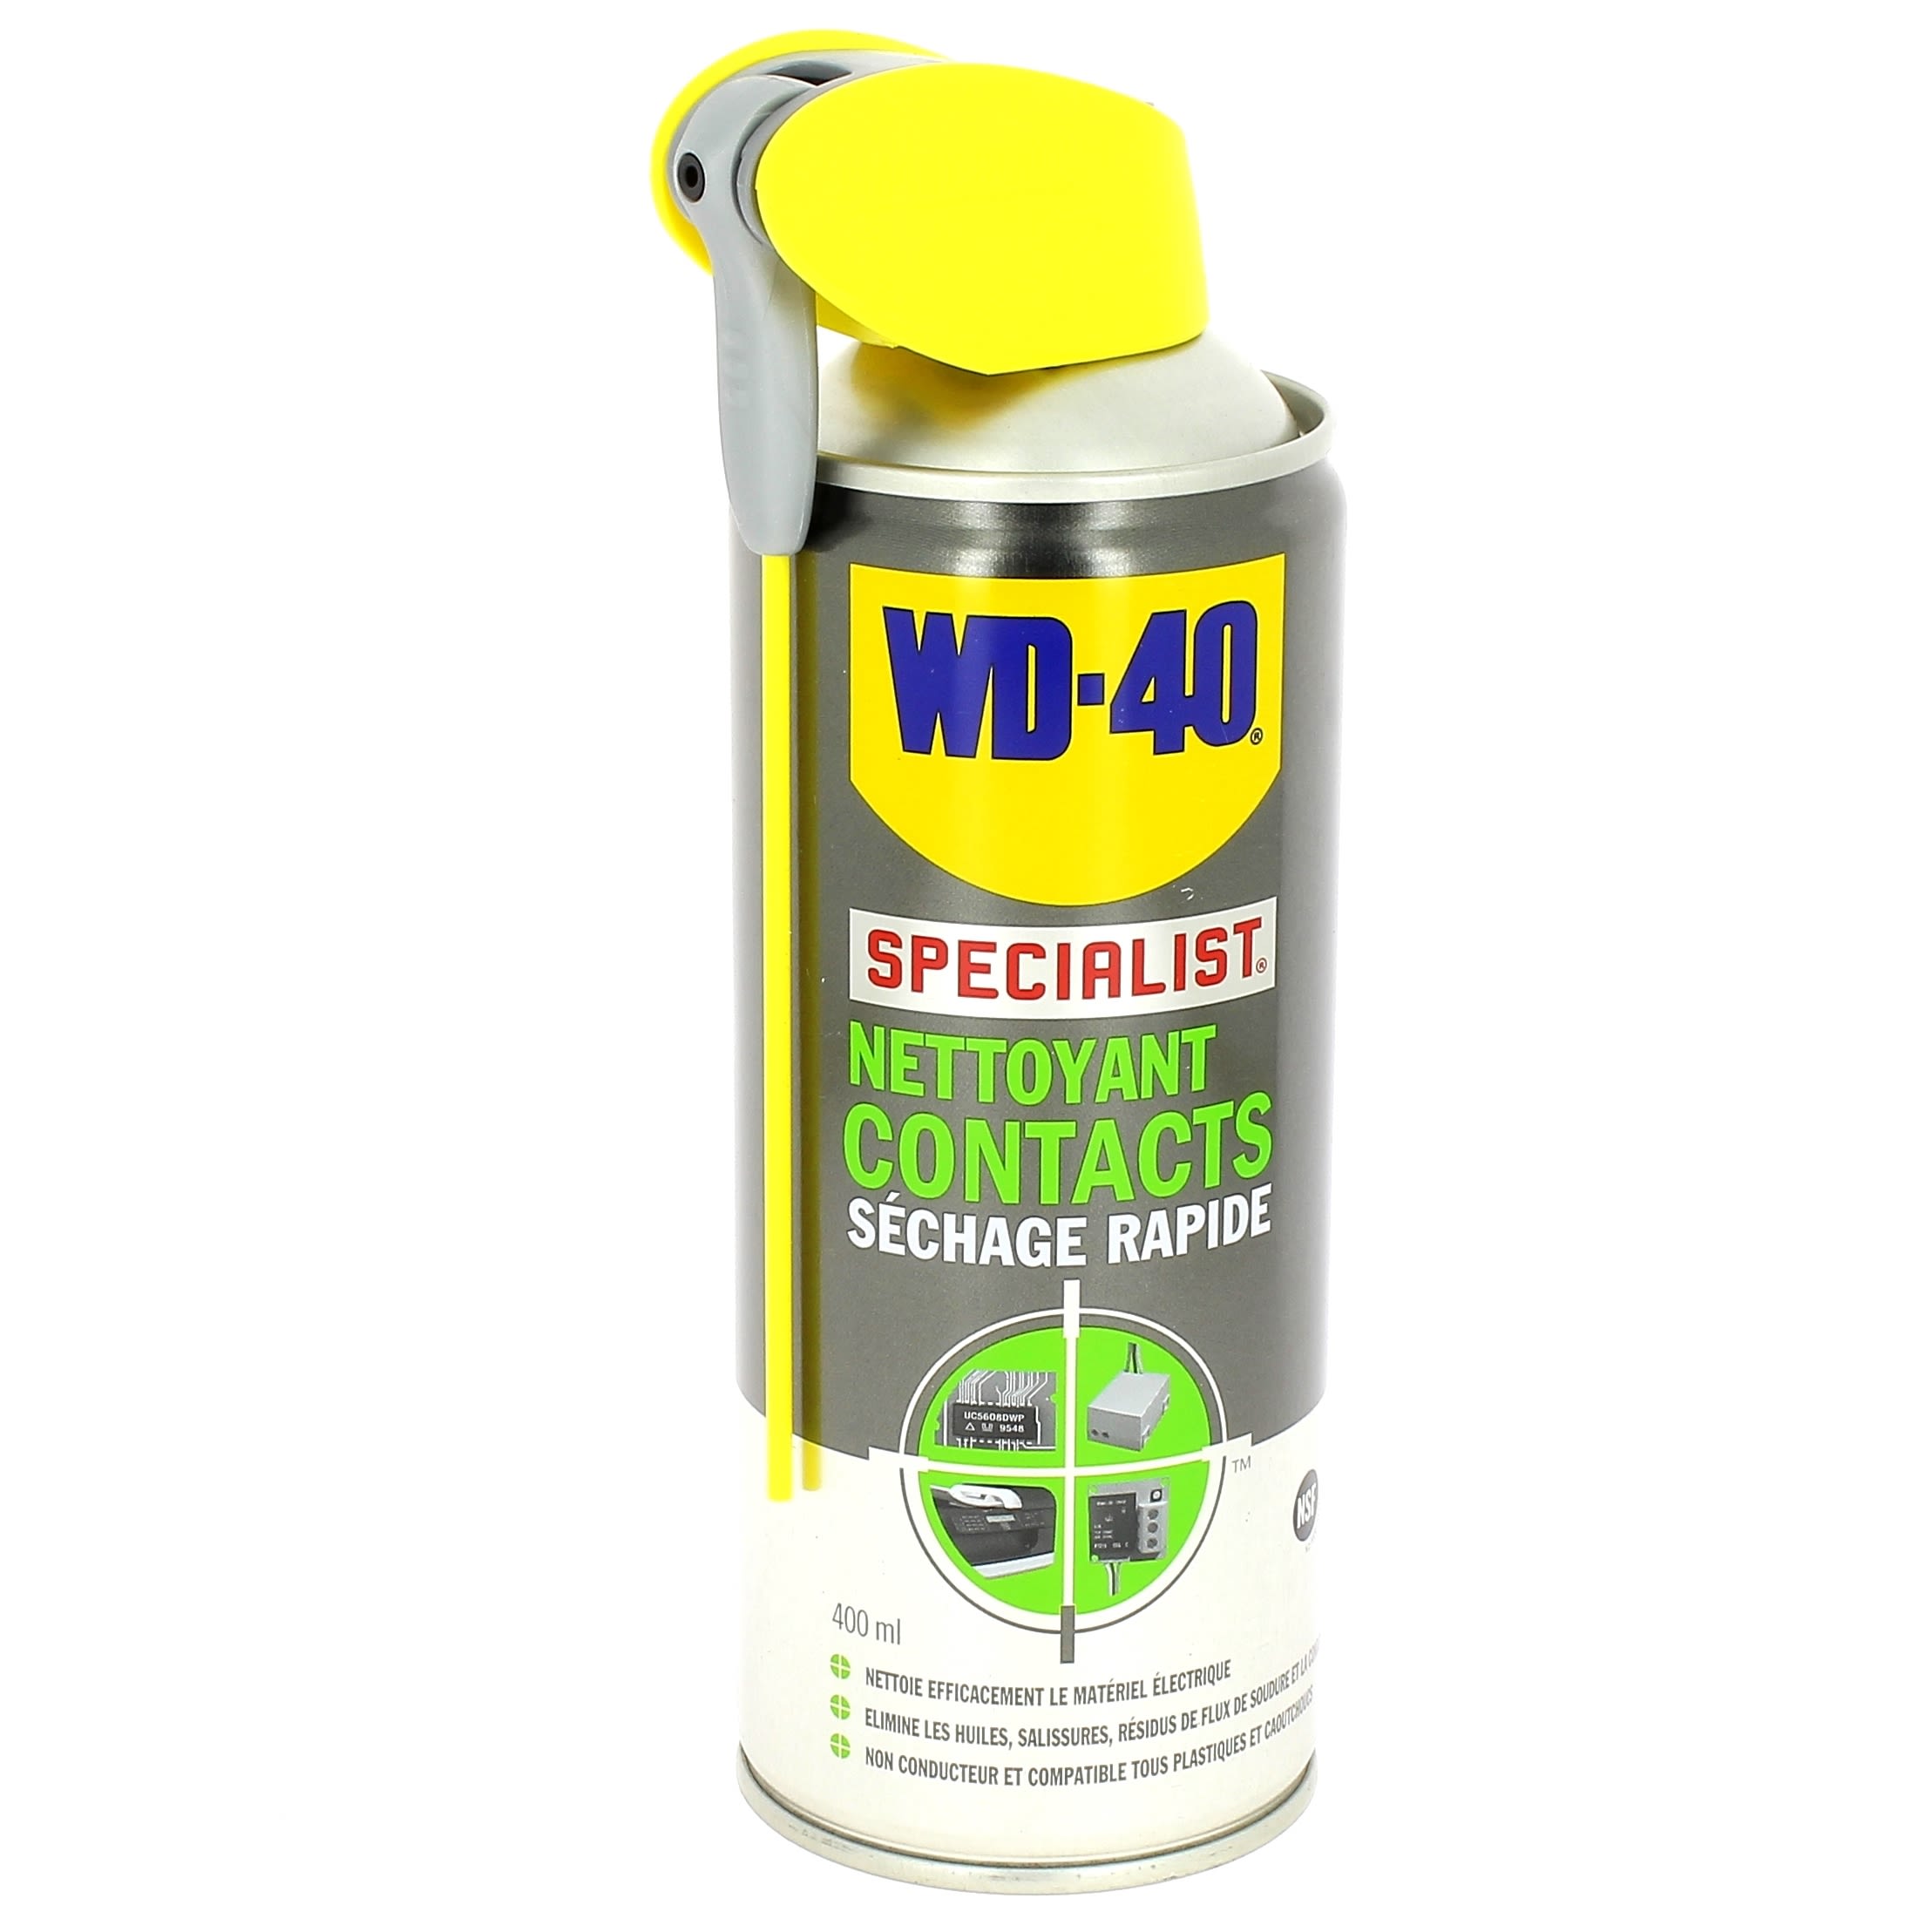 Nettoyant contact Specialist WD-40